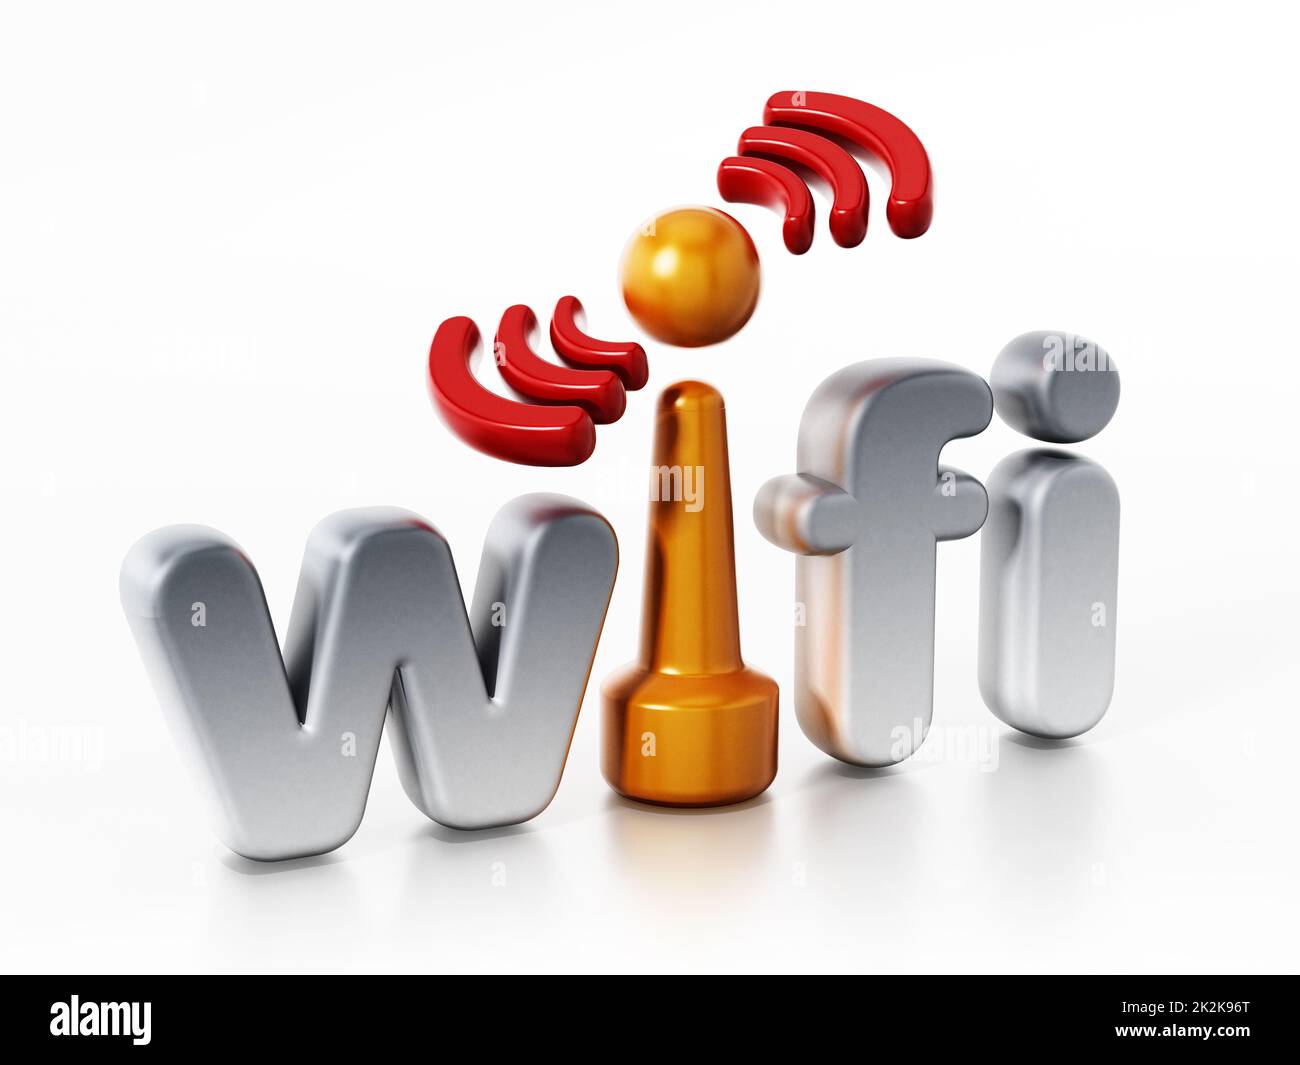 Wifi logo and wireless connection symbol. 3D illustration Stock Photo